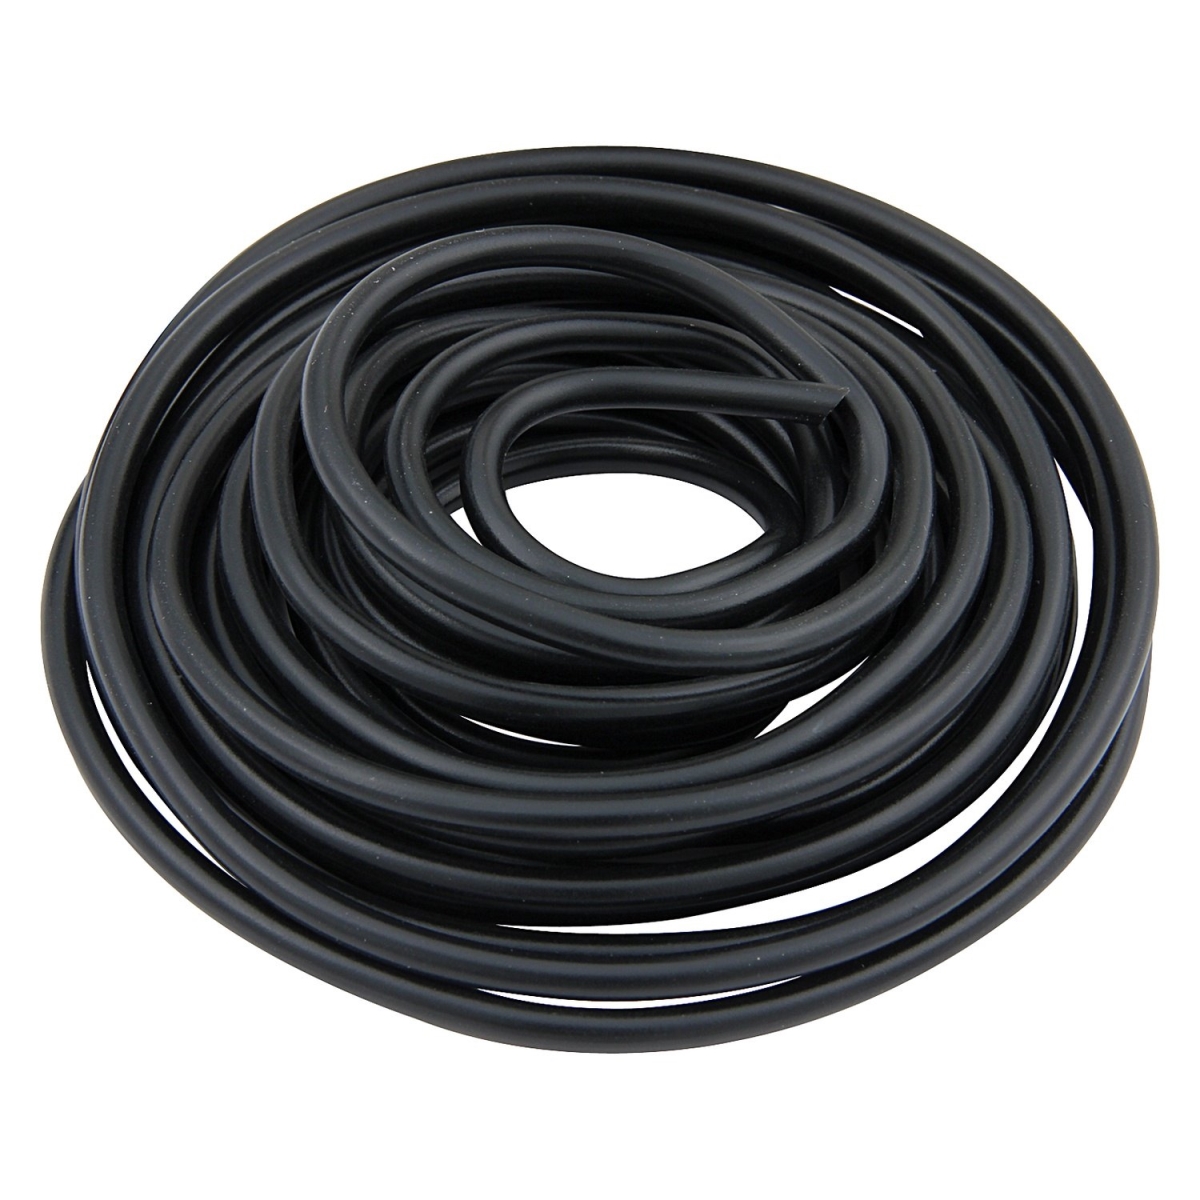 All76561 12 Ft. 12 Awg Black Primary Wire